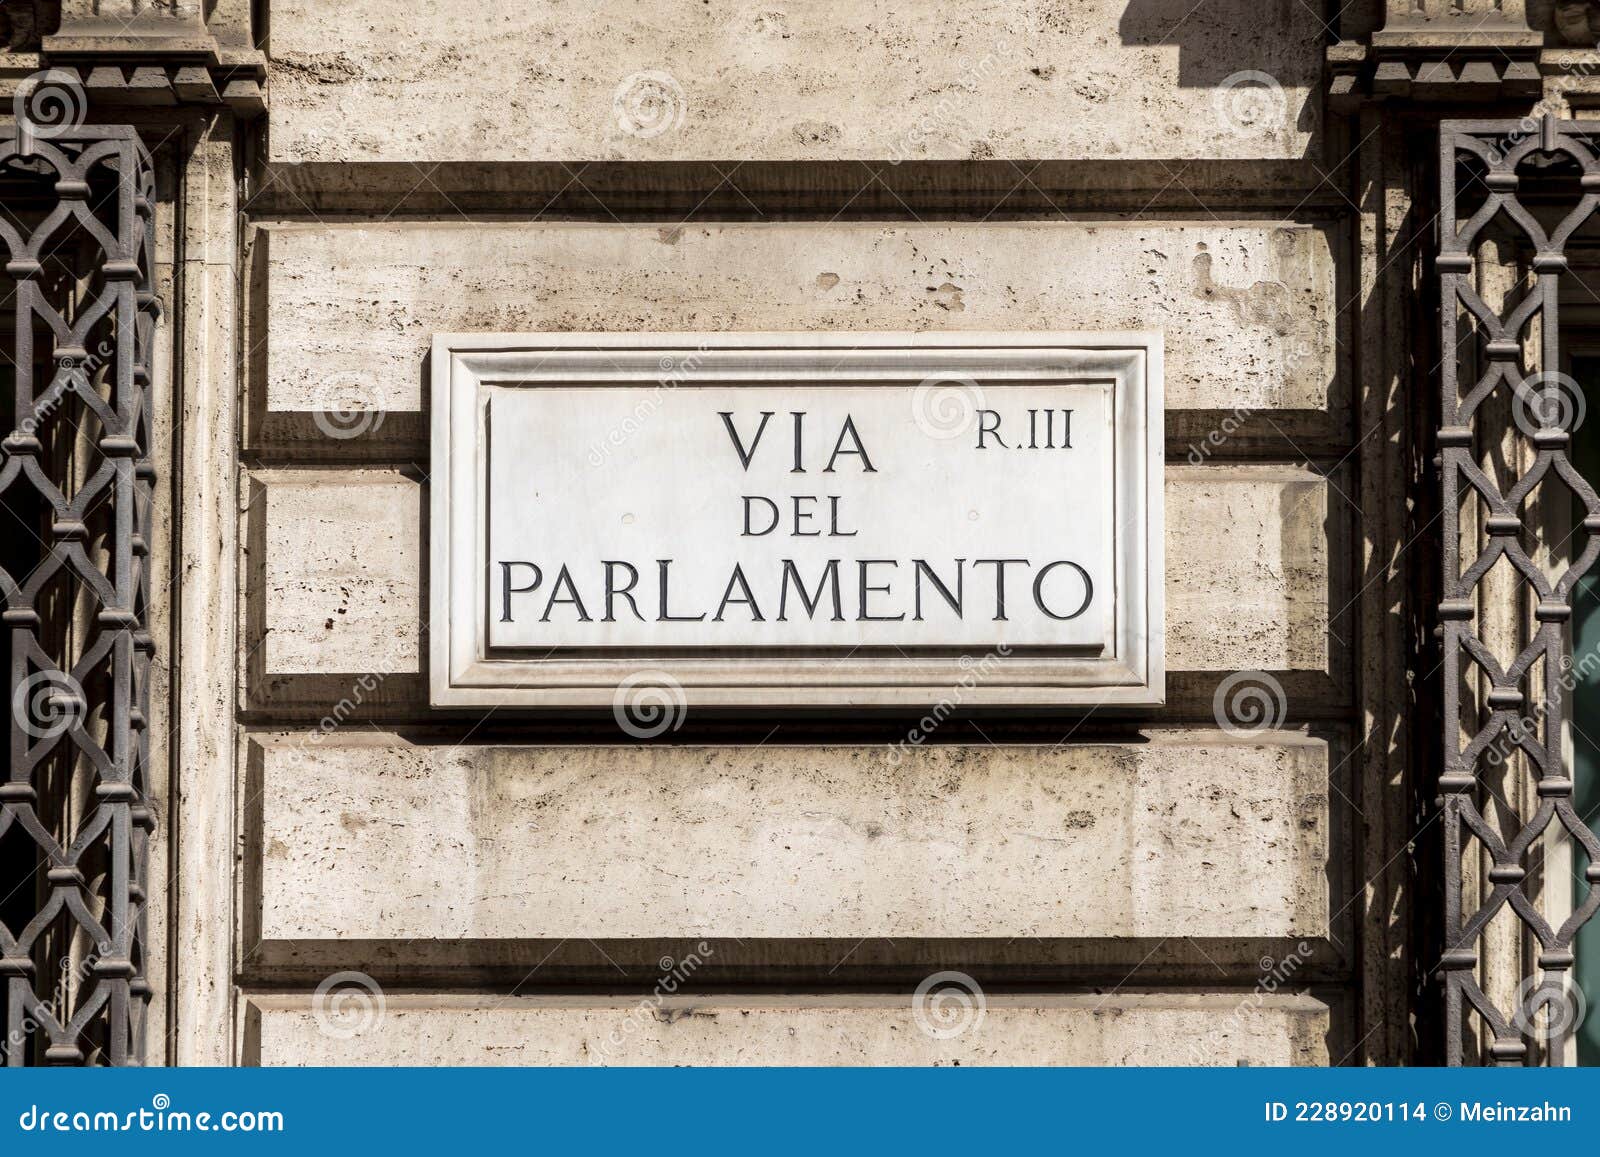 marble plate with street name via del parlamento- engl: parliament street - at the wall in rome